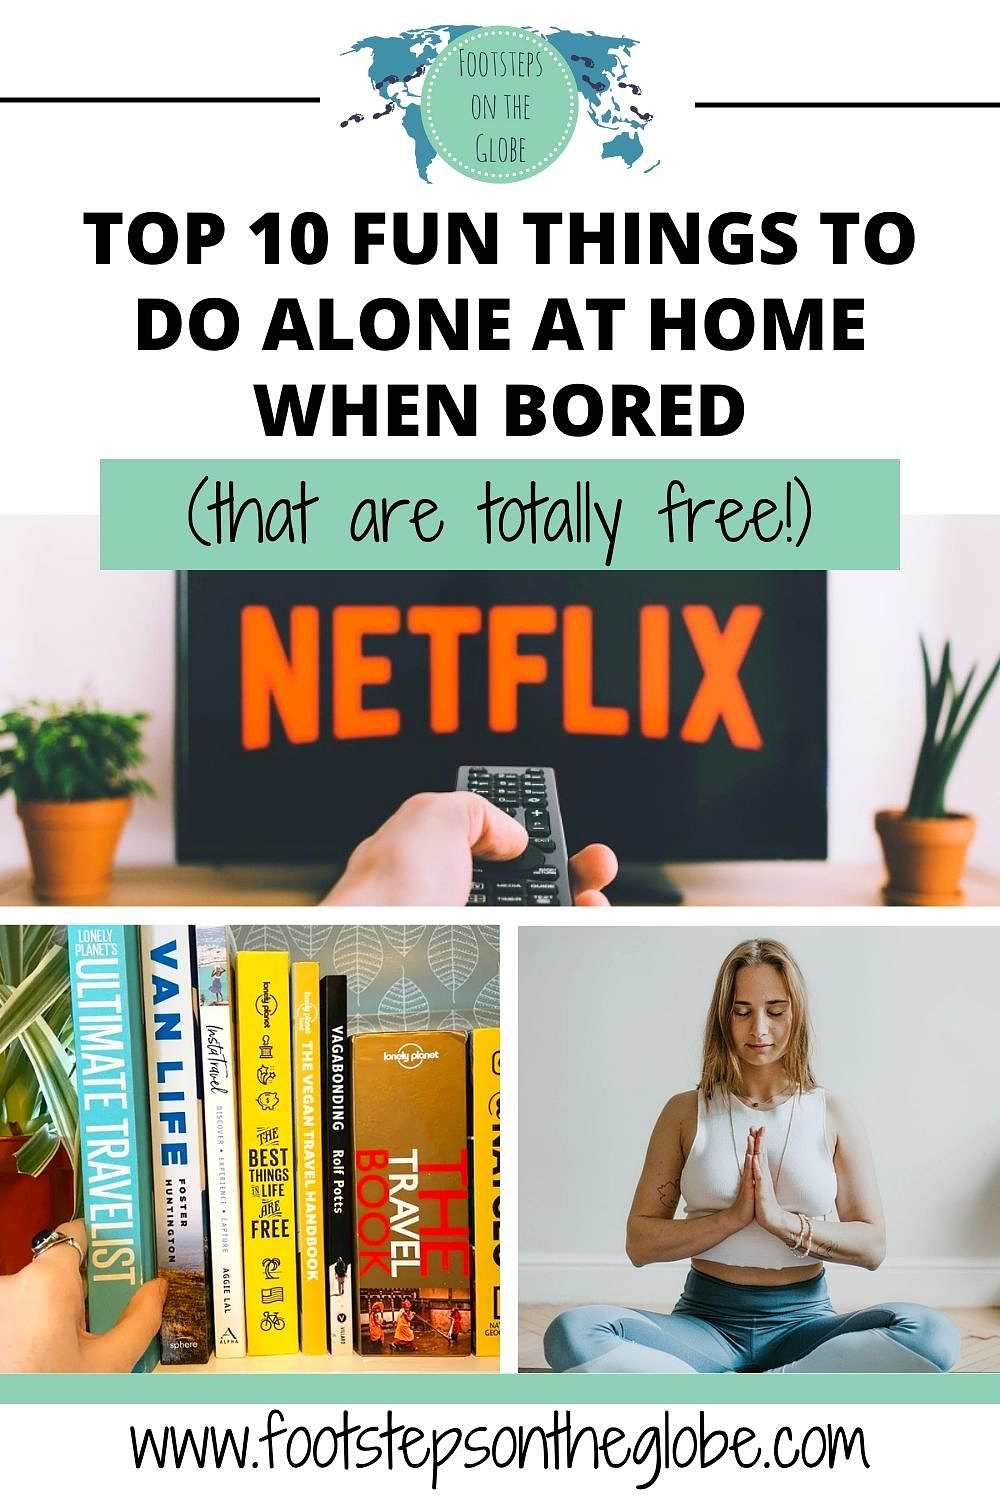 Pinterest image with three different images of Netflix on a screen, a row of travel books and a girl doing yoga with the text: "Top 10 fun things to do alone at home when bored (that are totally free!)"